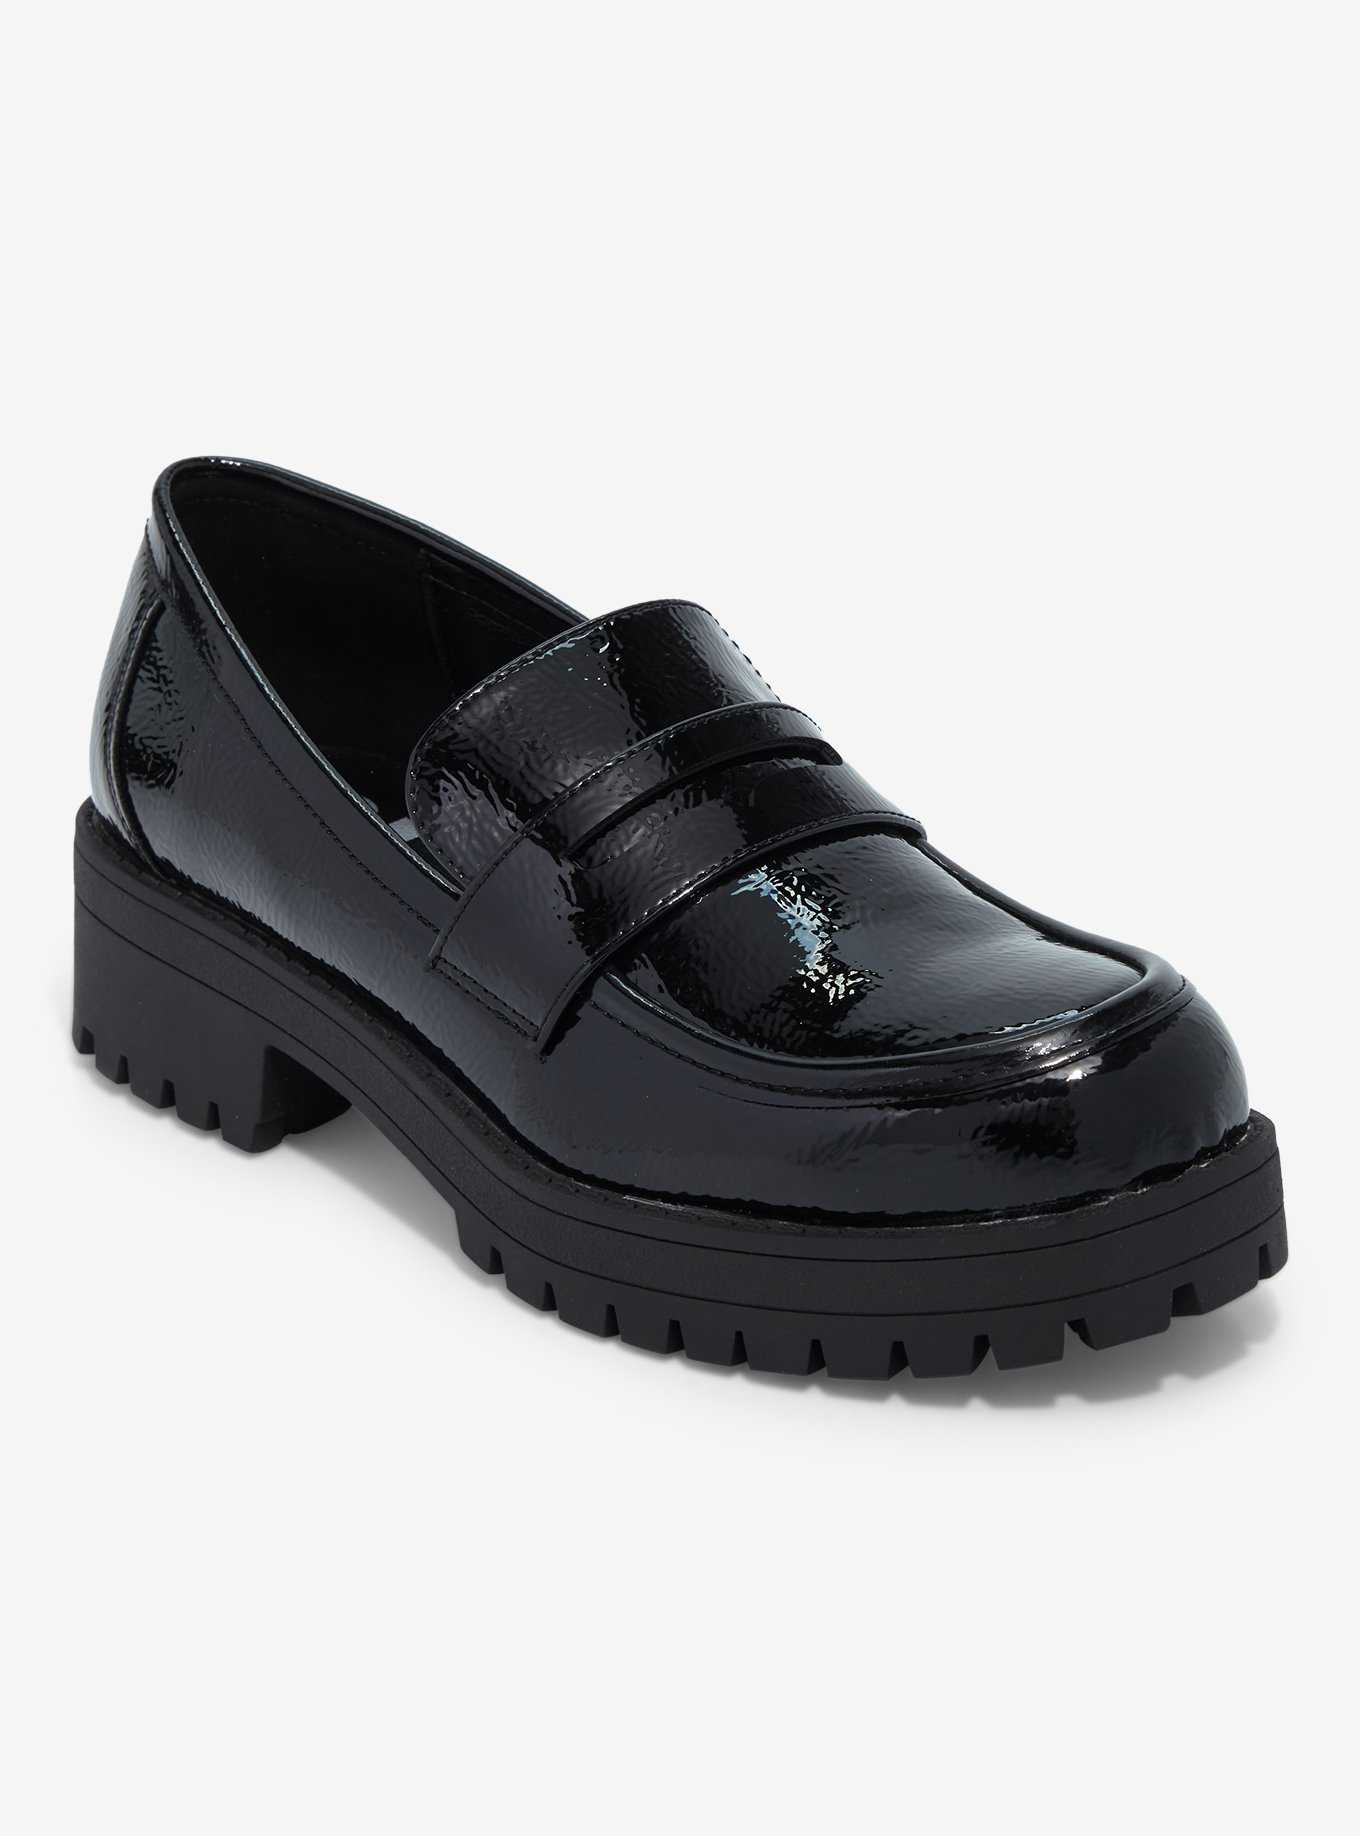 Dirty Laundry Black Voidz Loafers, , hi-res